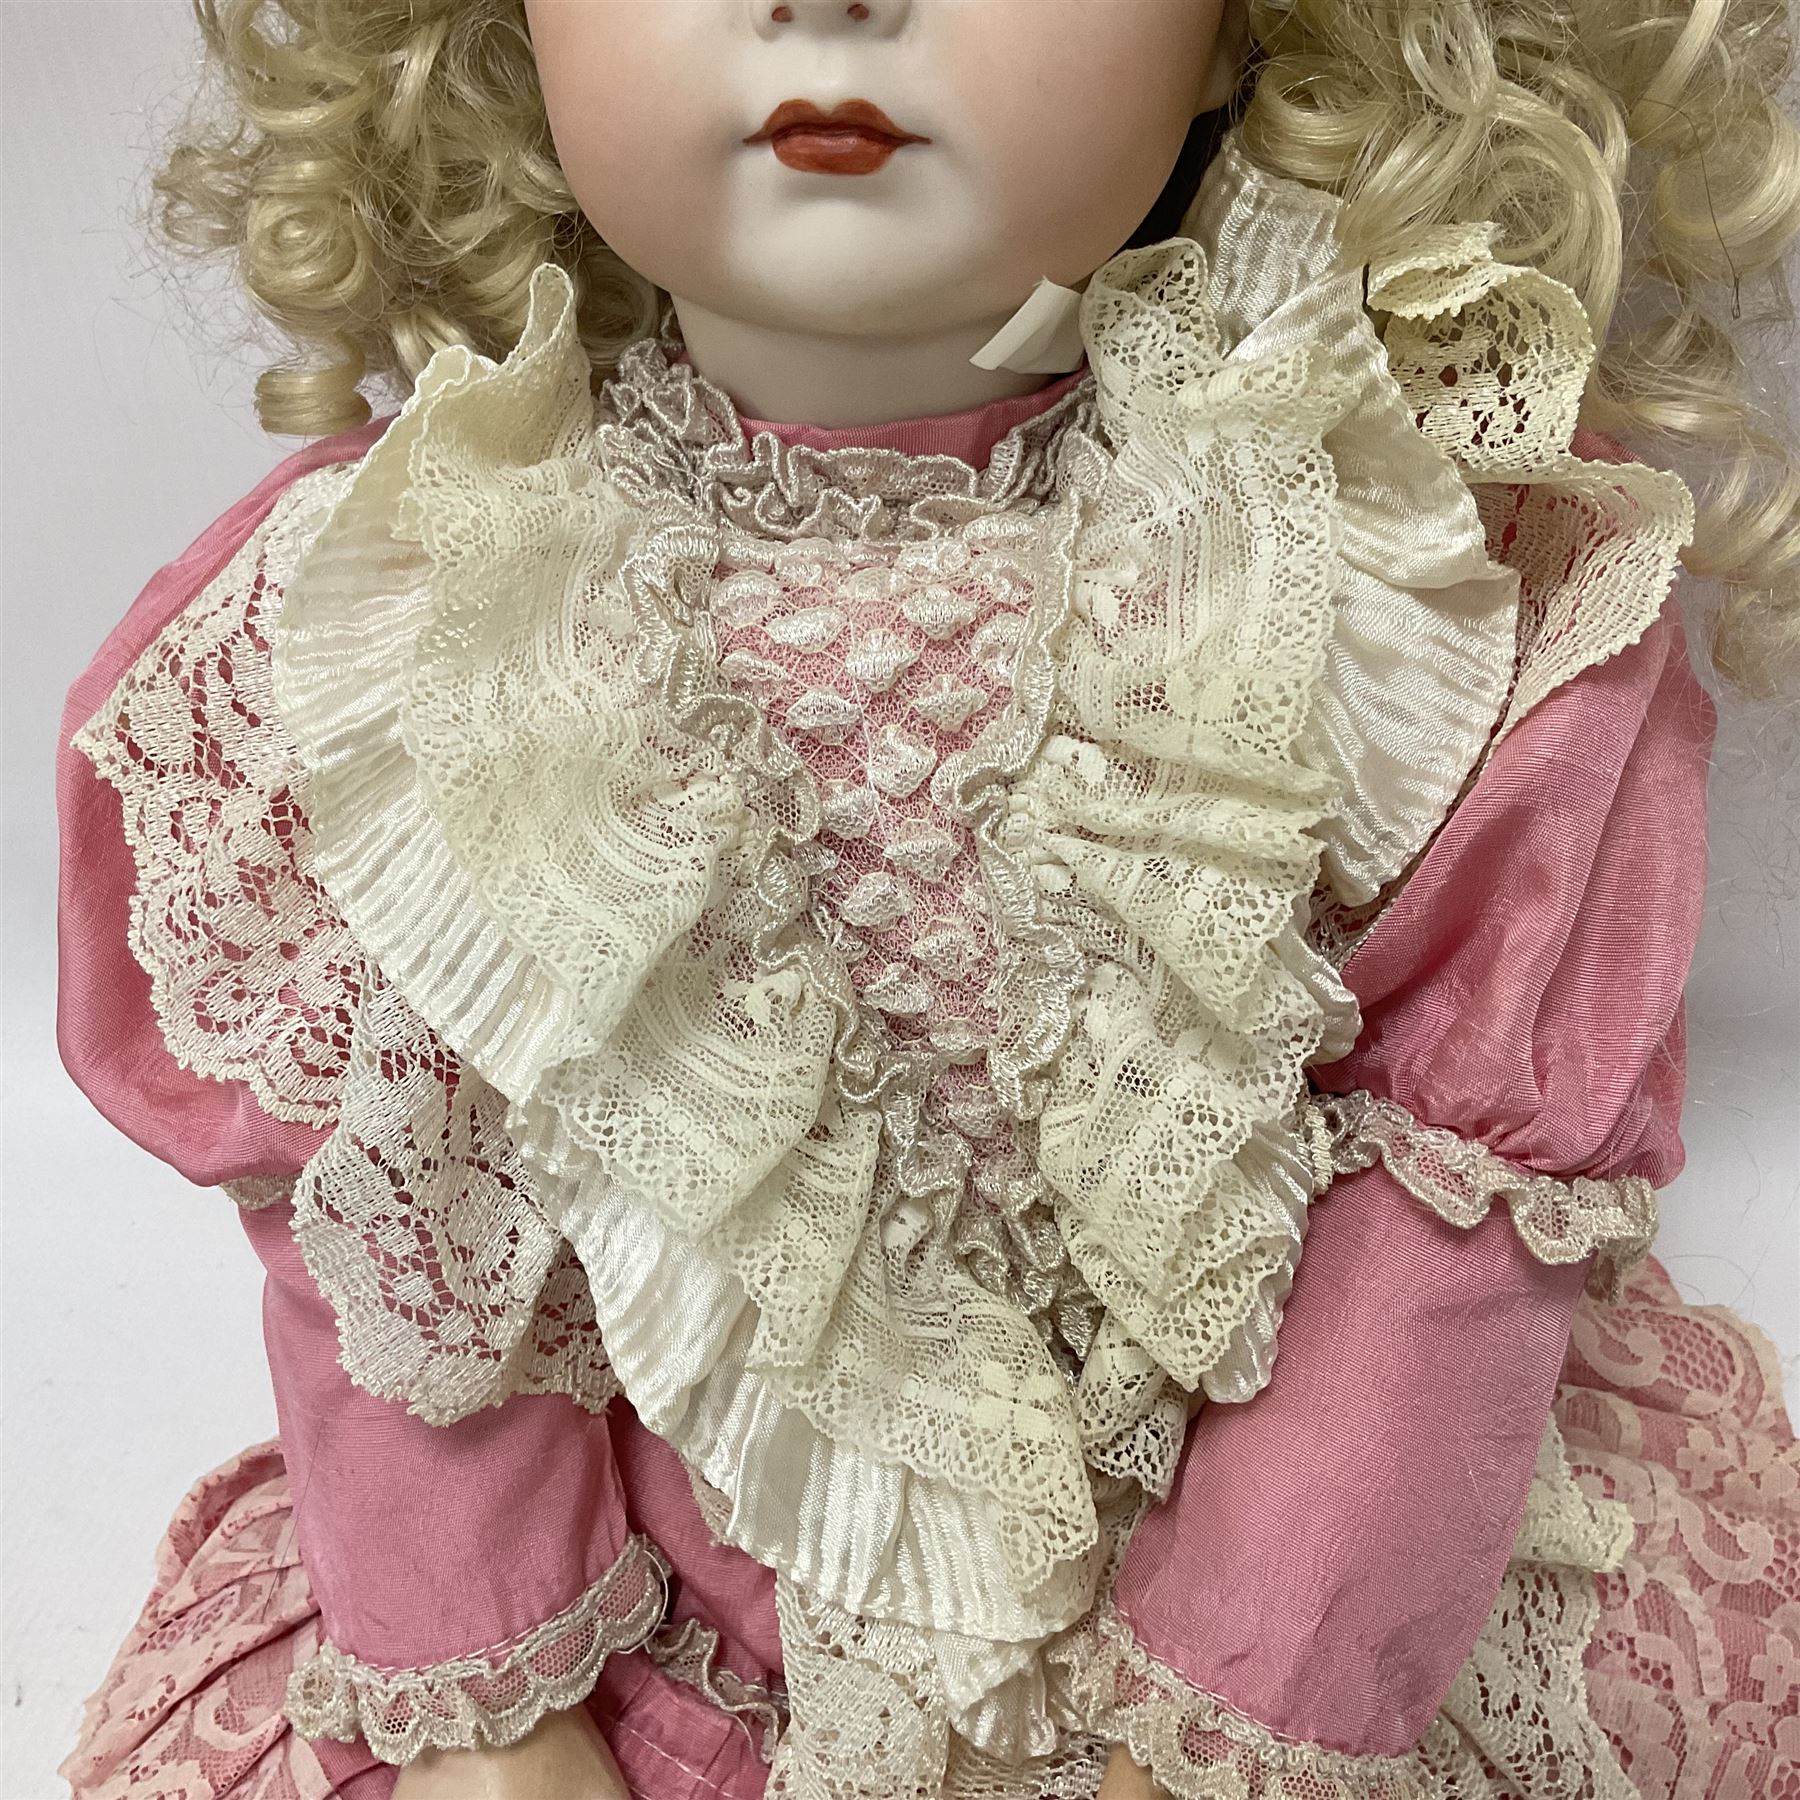 Reproduction Simon & Halbig bisque head doll with applied hair and jointed limbs; marked Simon & Hal - Image 3 of 11